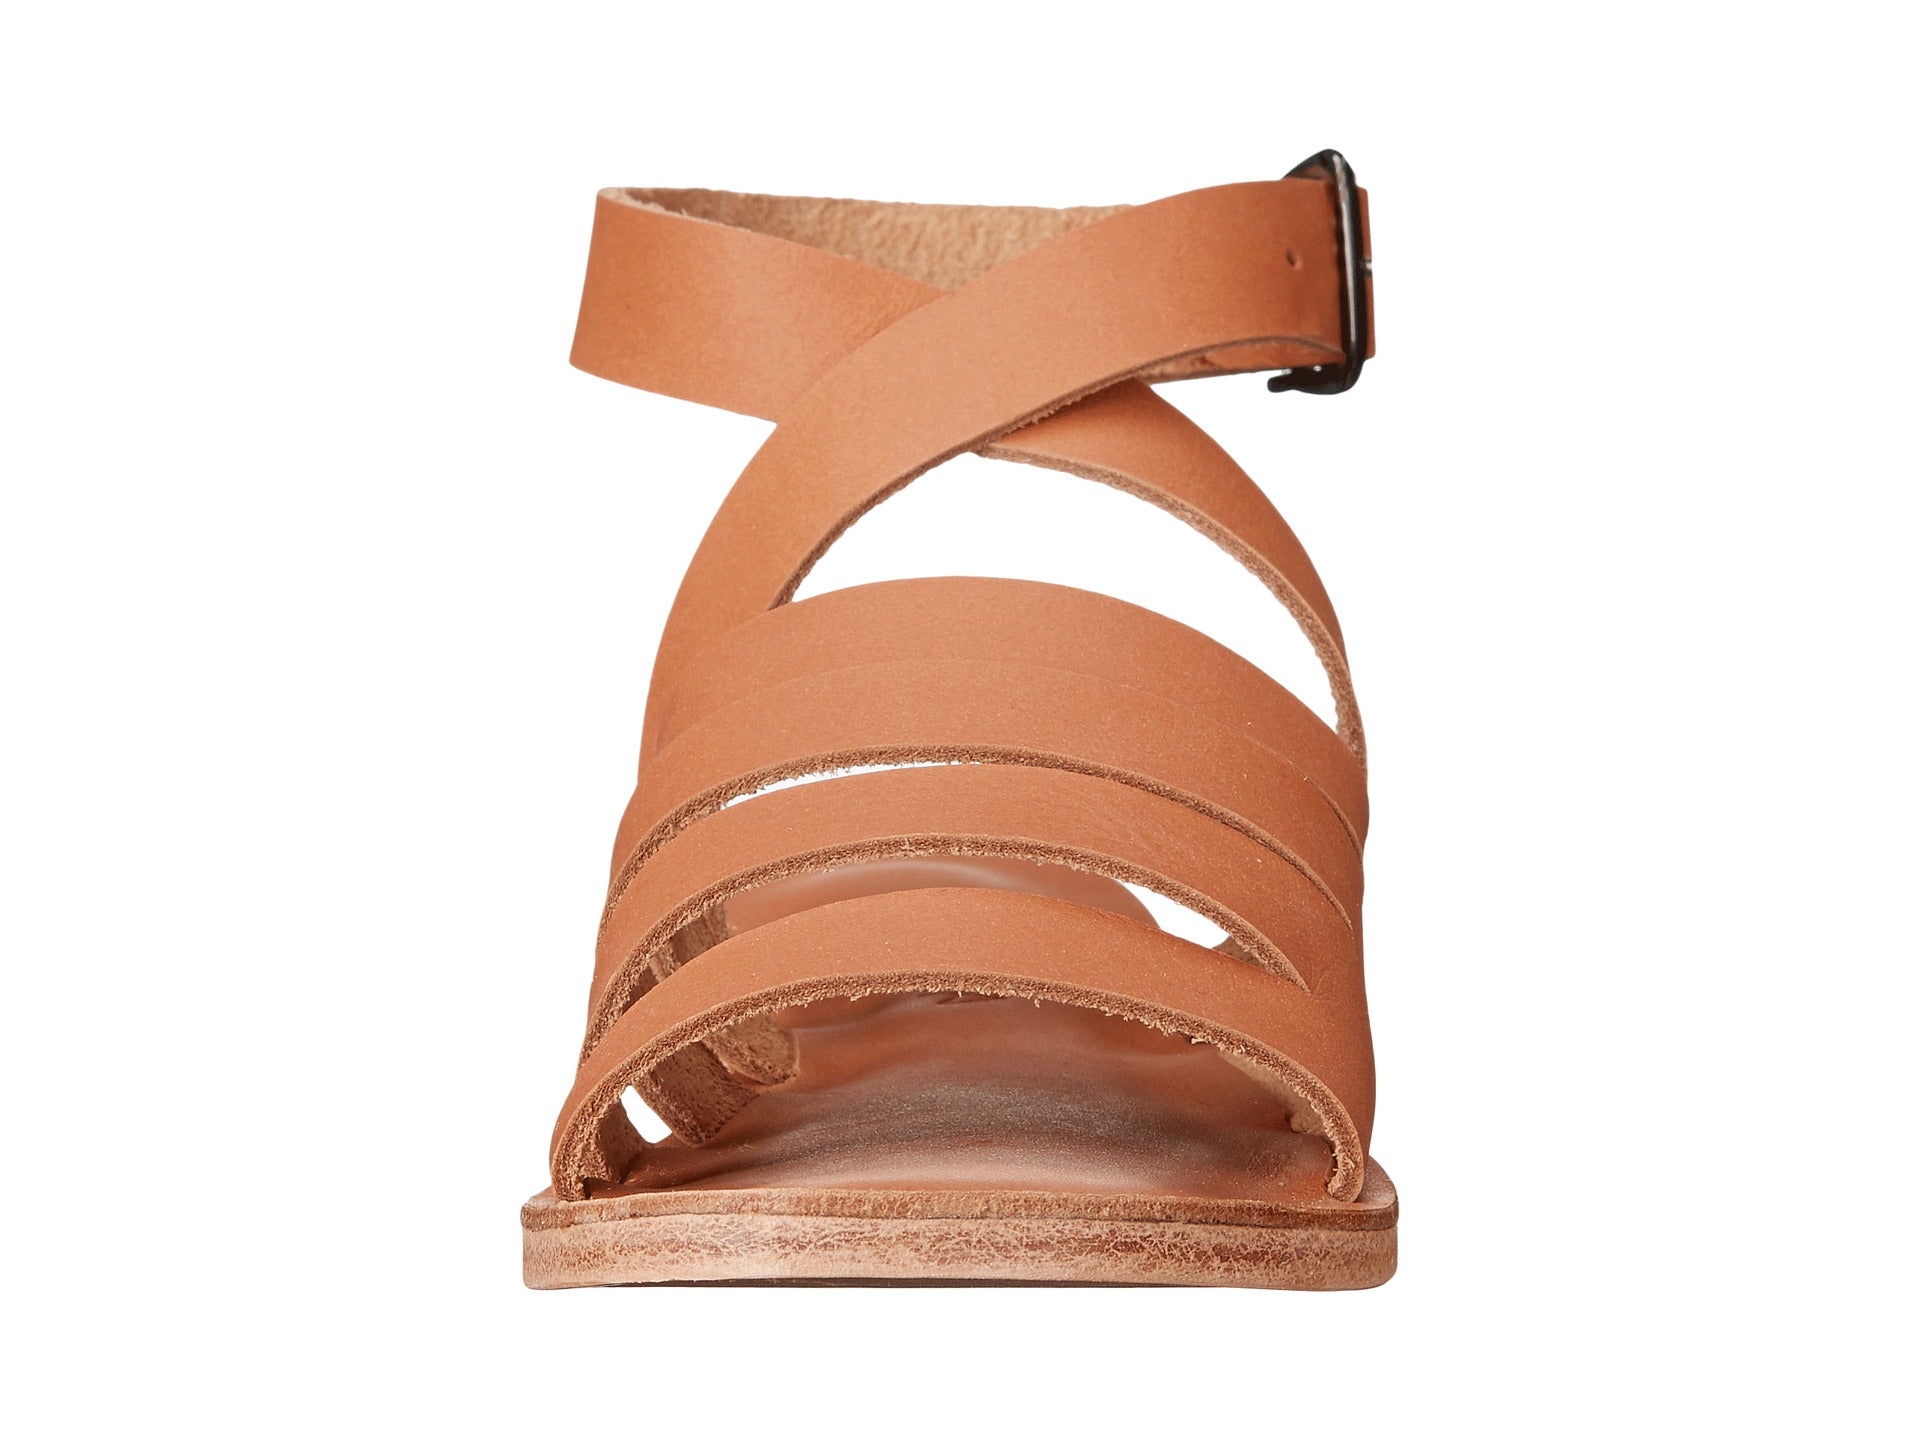 Santa Monica Blvd tan, handmade leather sandals with anklet strap and buckle  - front View